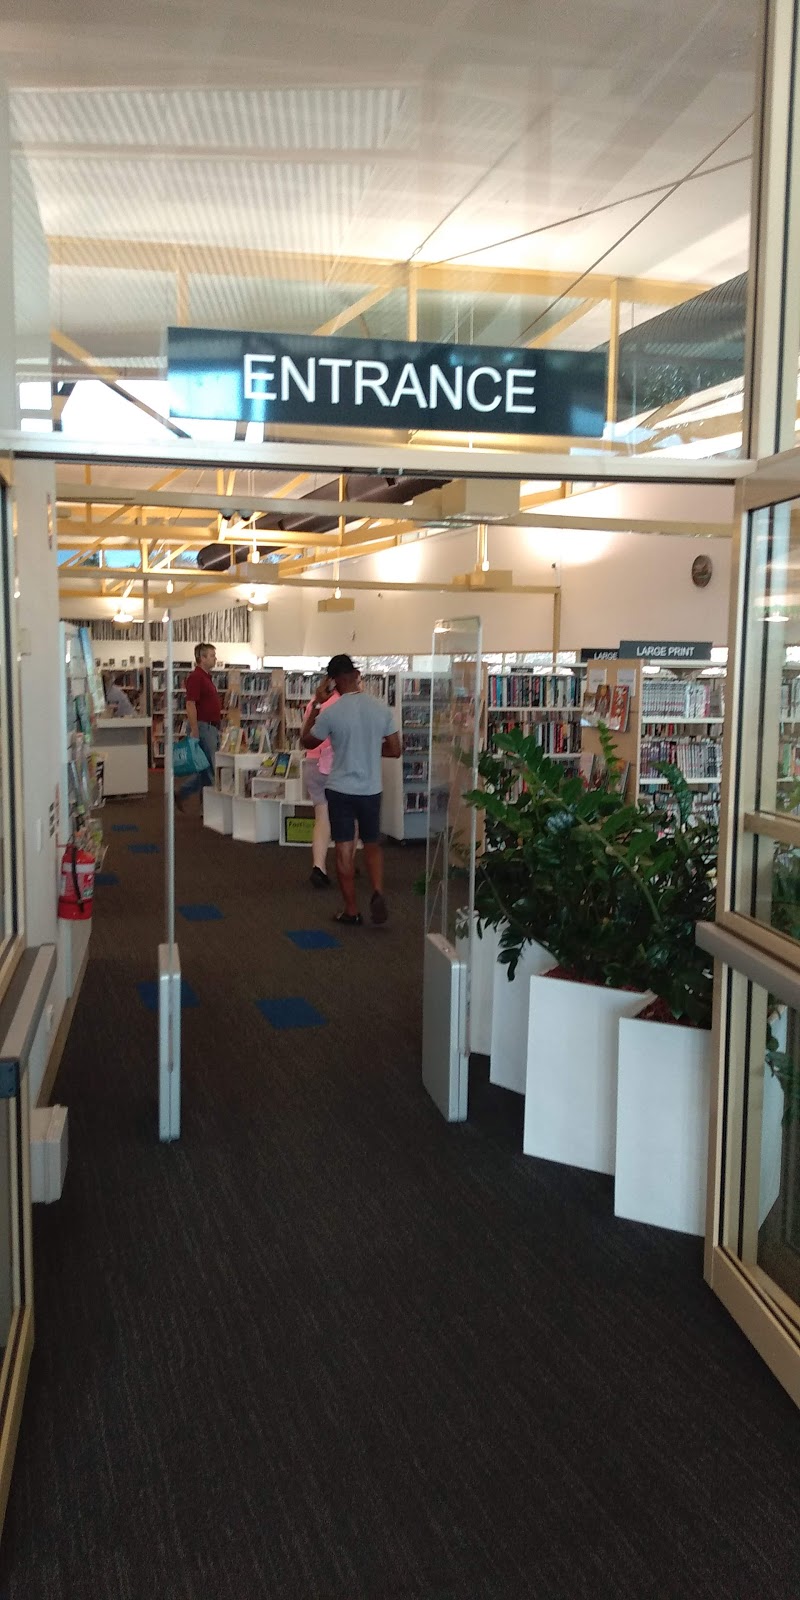 Mount Ommaney Library | library | Mt Ommaney Shopping Centre, 171 Dandenong Rd, Mount Ommaney QLD 4074, Australia | 0734077010 OR +61 7 3407 7010